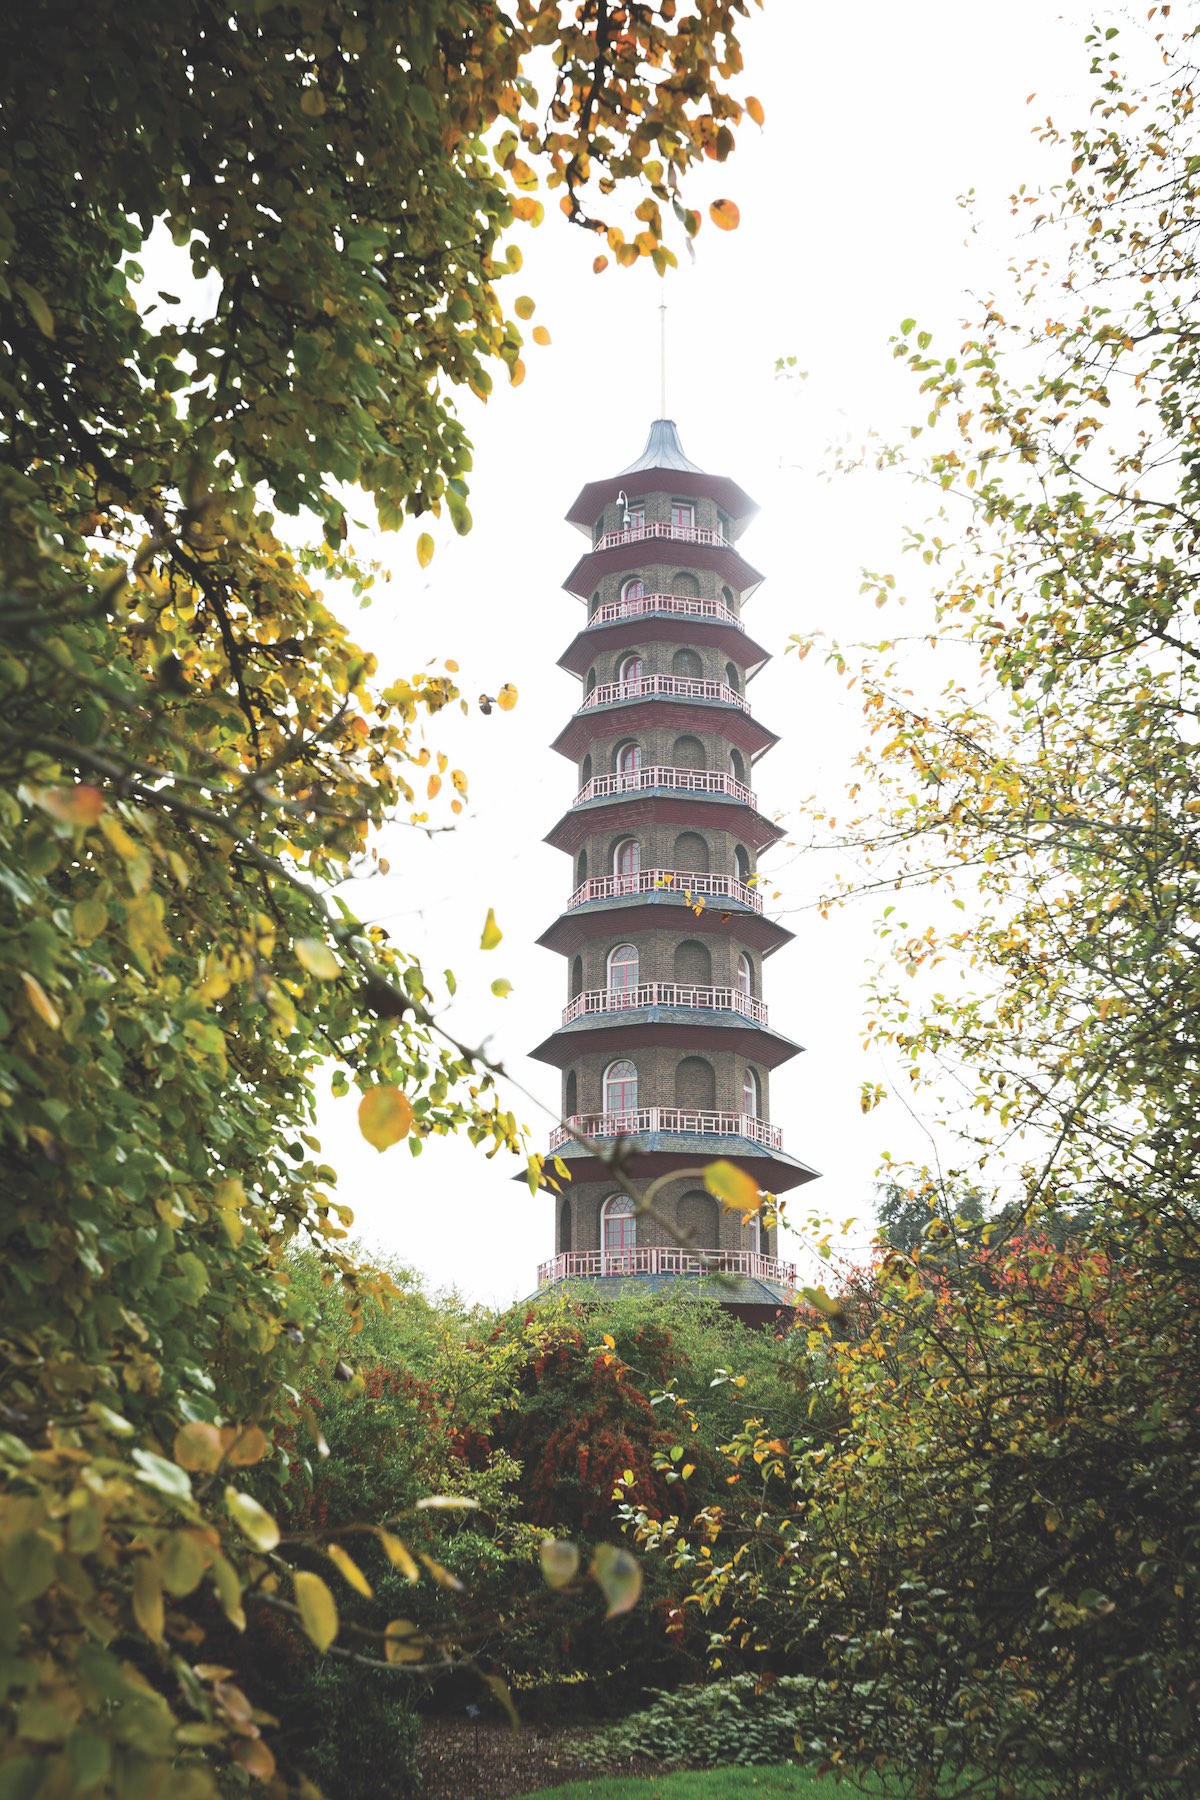 Tall Chinese-influenced tower in a green garden.